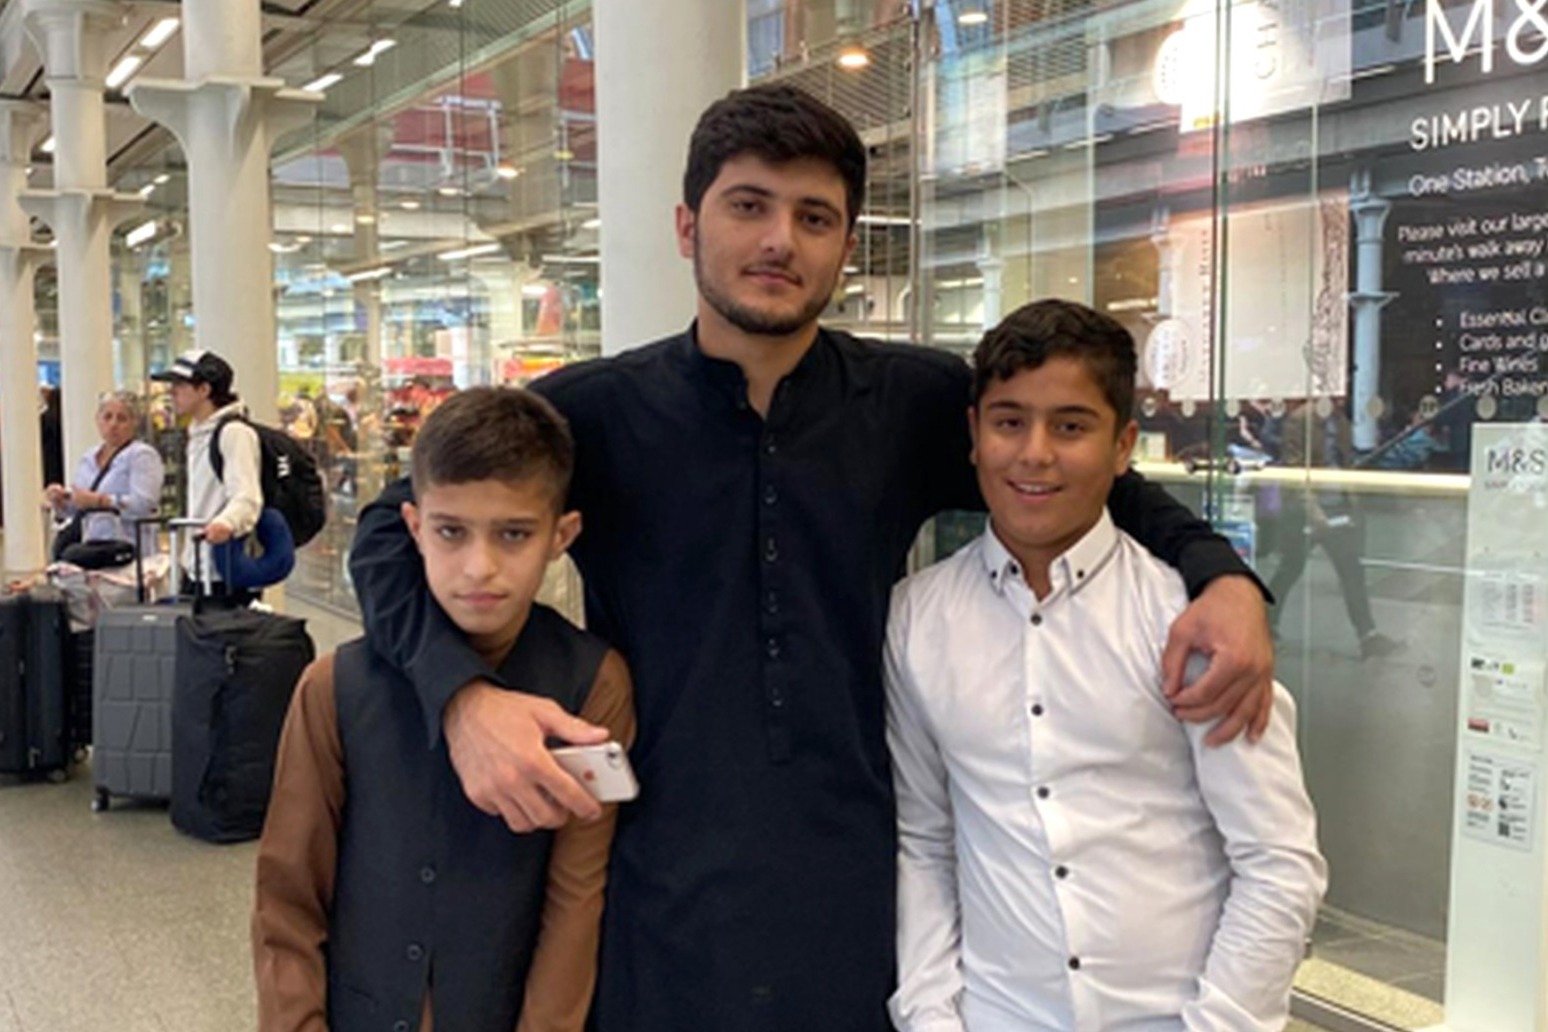 Afghan boy, 11, reunited with twin brother in UK after a year stranded in France 